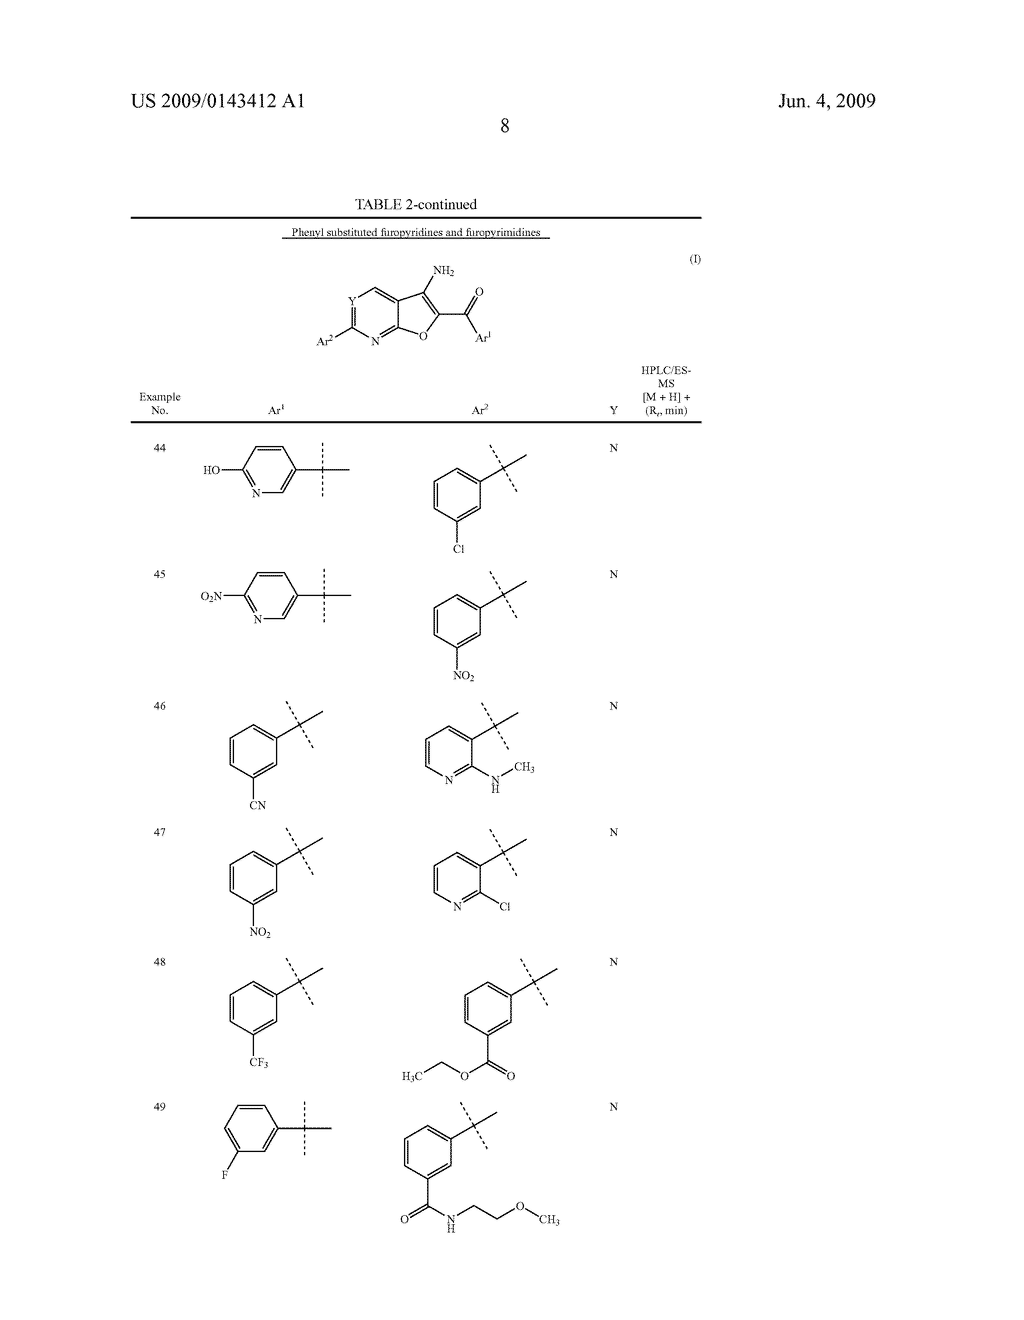 FUROPYRIDINE AND FUROPYRIMIDINE DERIVATIVES FOR THE TREATMENT OF HYPER-PROLIFERATIVE DISORDERS - diagram, schematic, and image 09